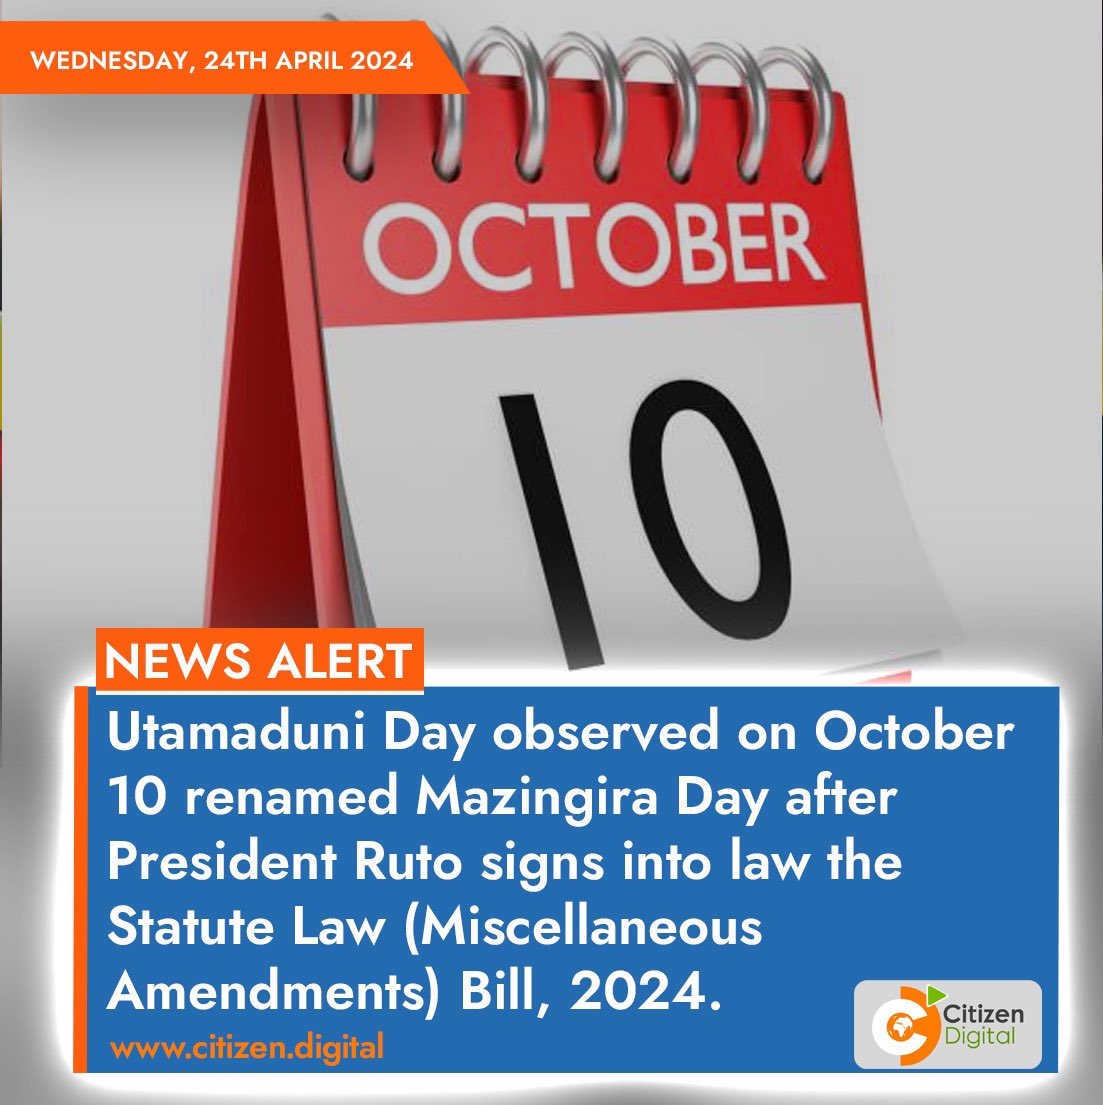 Utamaduni Day observed on October 10 renamed Mazingira Day after President Ruto signs into law the Statute Law (Miscellaneous Amendments) Bill, 2024.